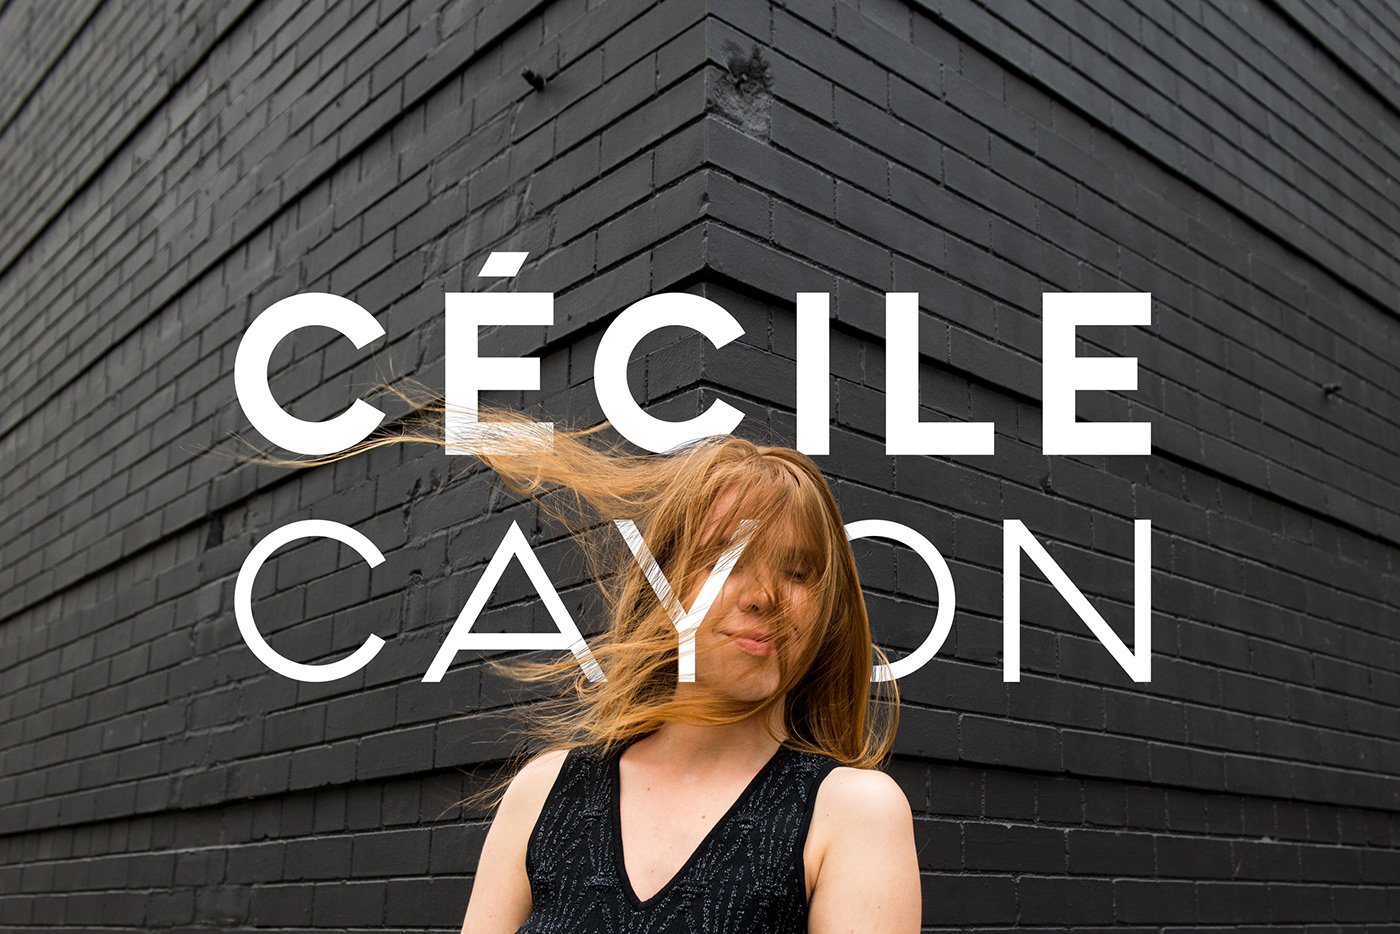 Key visual and advertising campaign for Cécile Cayon's visual identity